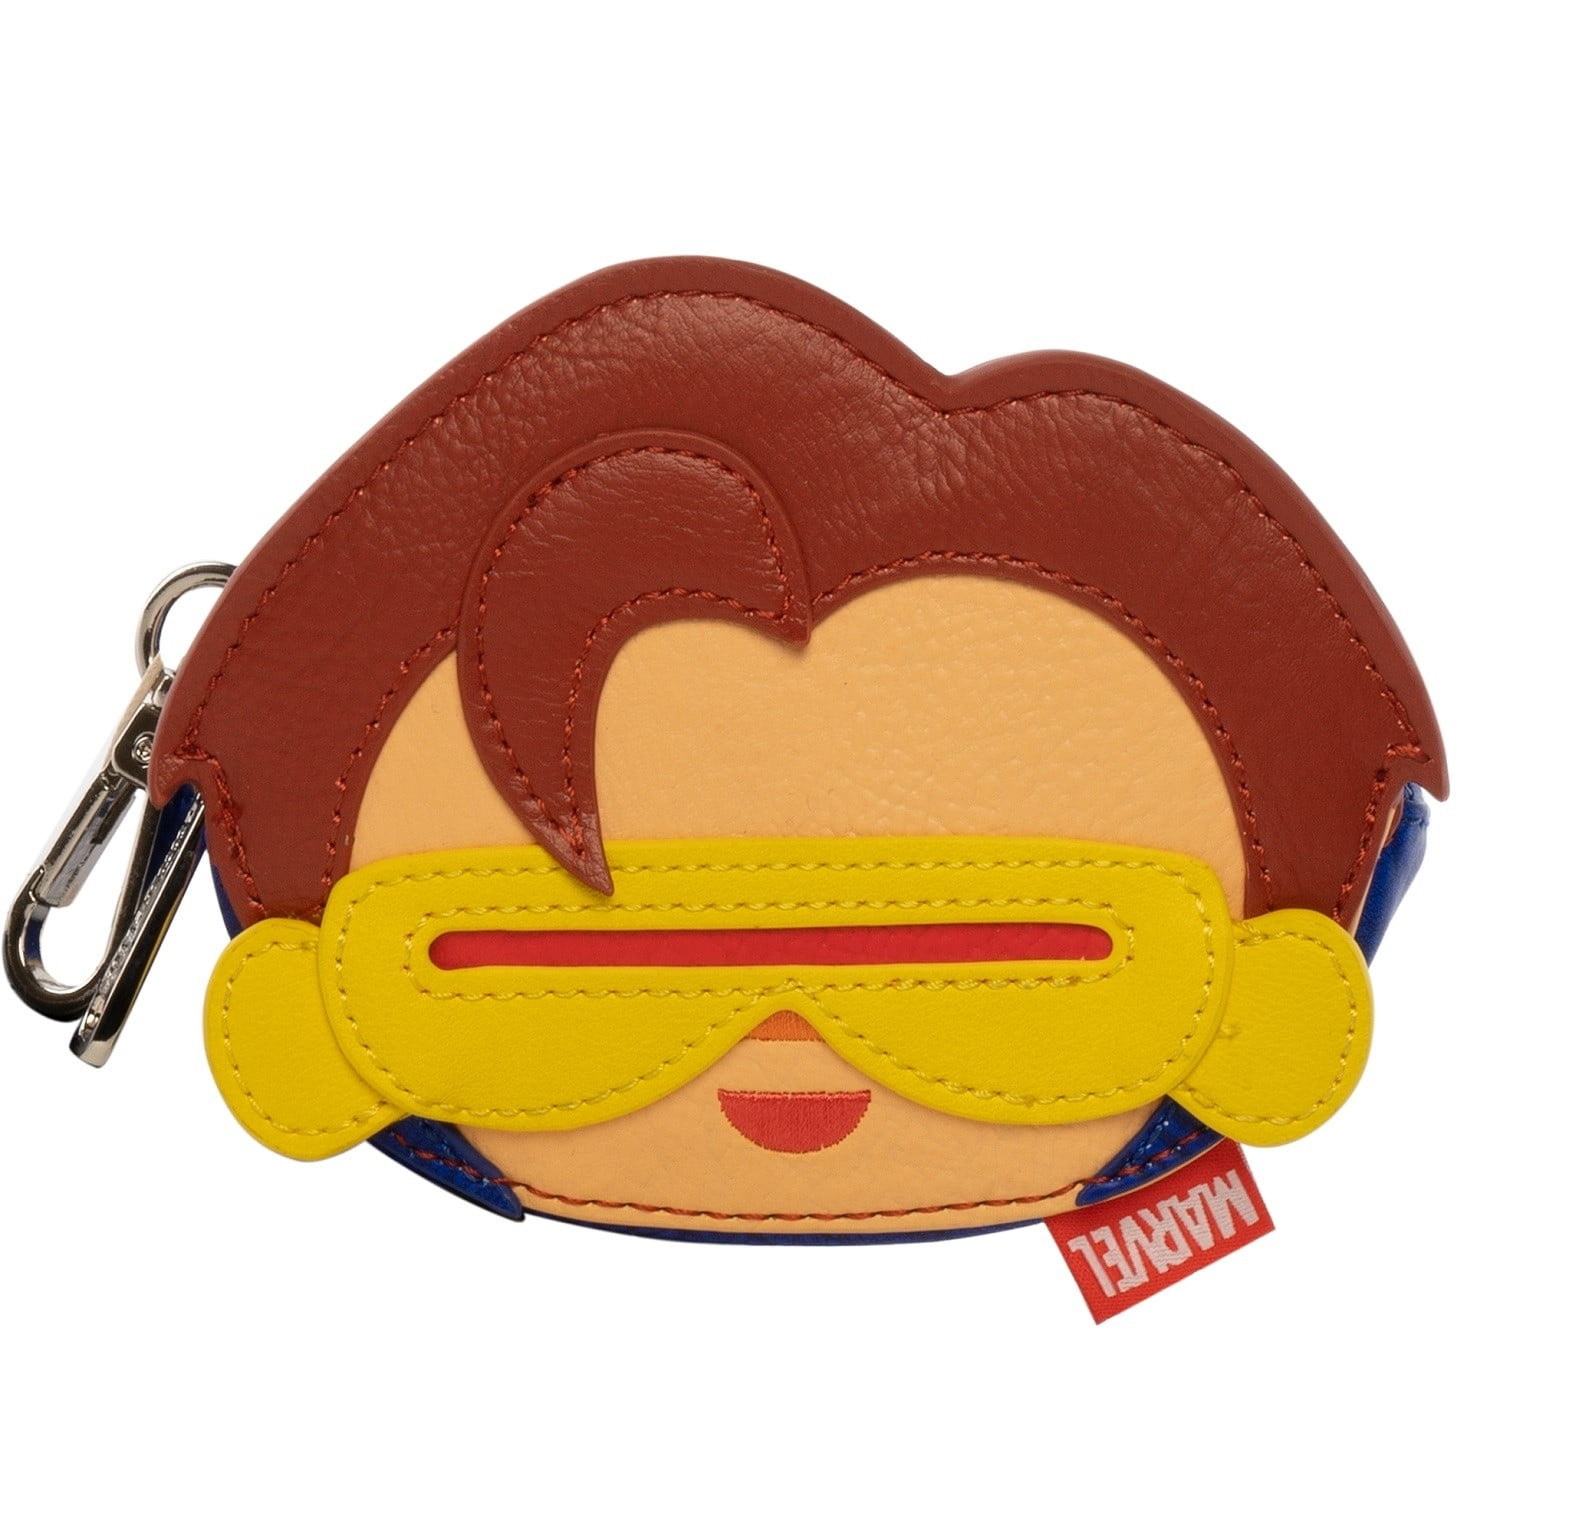 New Loungefly X Marvel X-Men Cyclops Coin Bag Mini Purse Pouch Licensed |  Walmart Canada